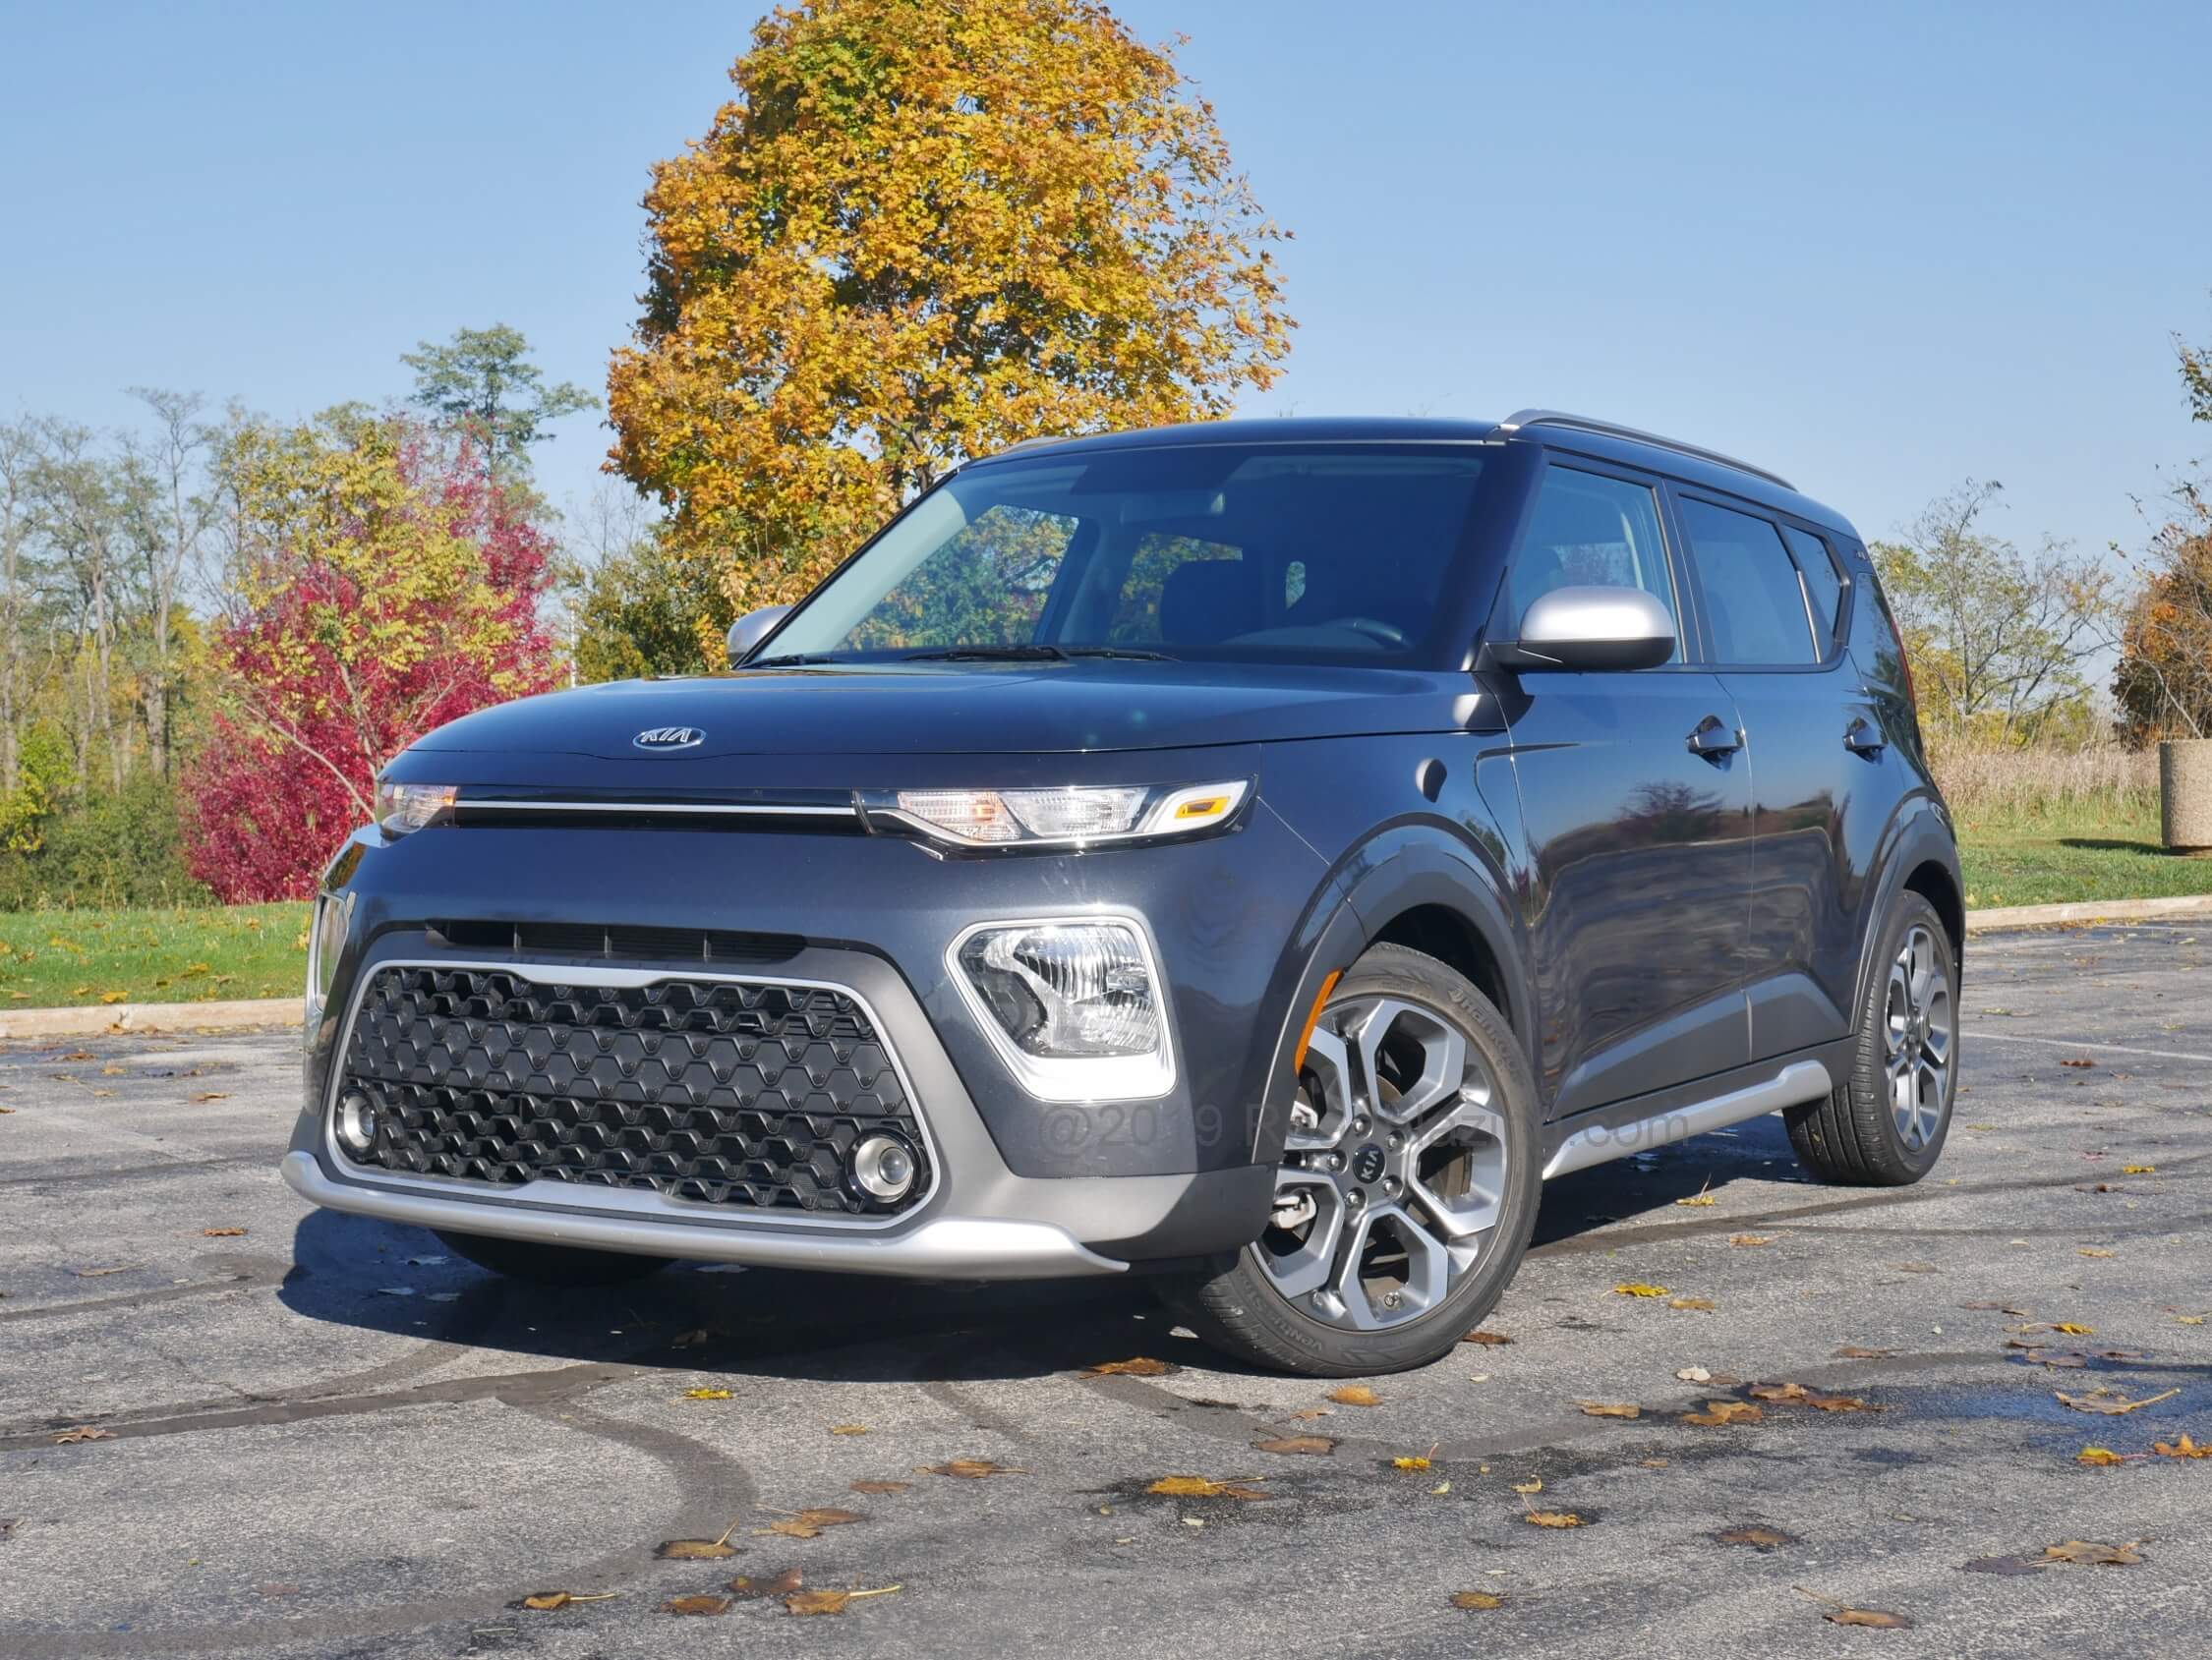 2020 Kia Soul X-Line: New wafer thin upper grille flanked by DRLs and trapezoid honeycomb lower fascia flanked by arrow housing headlamps for boldness.